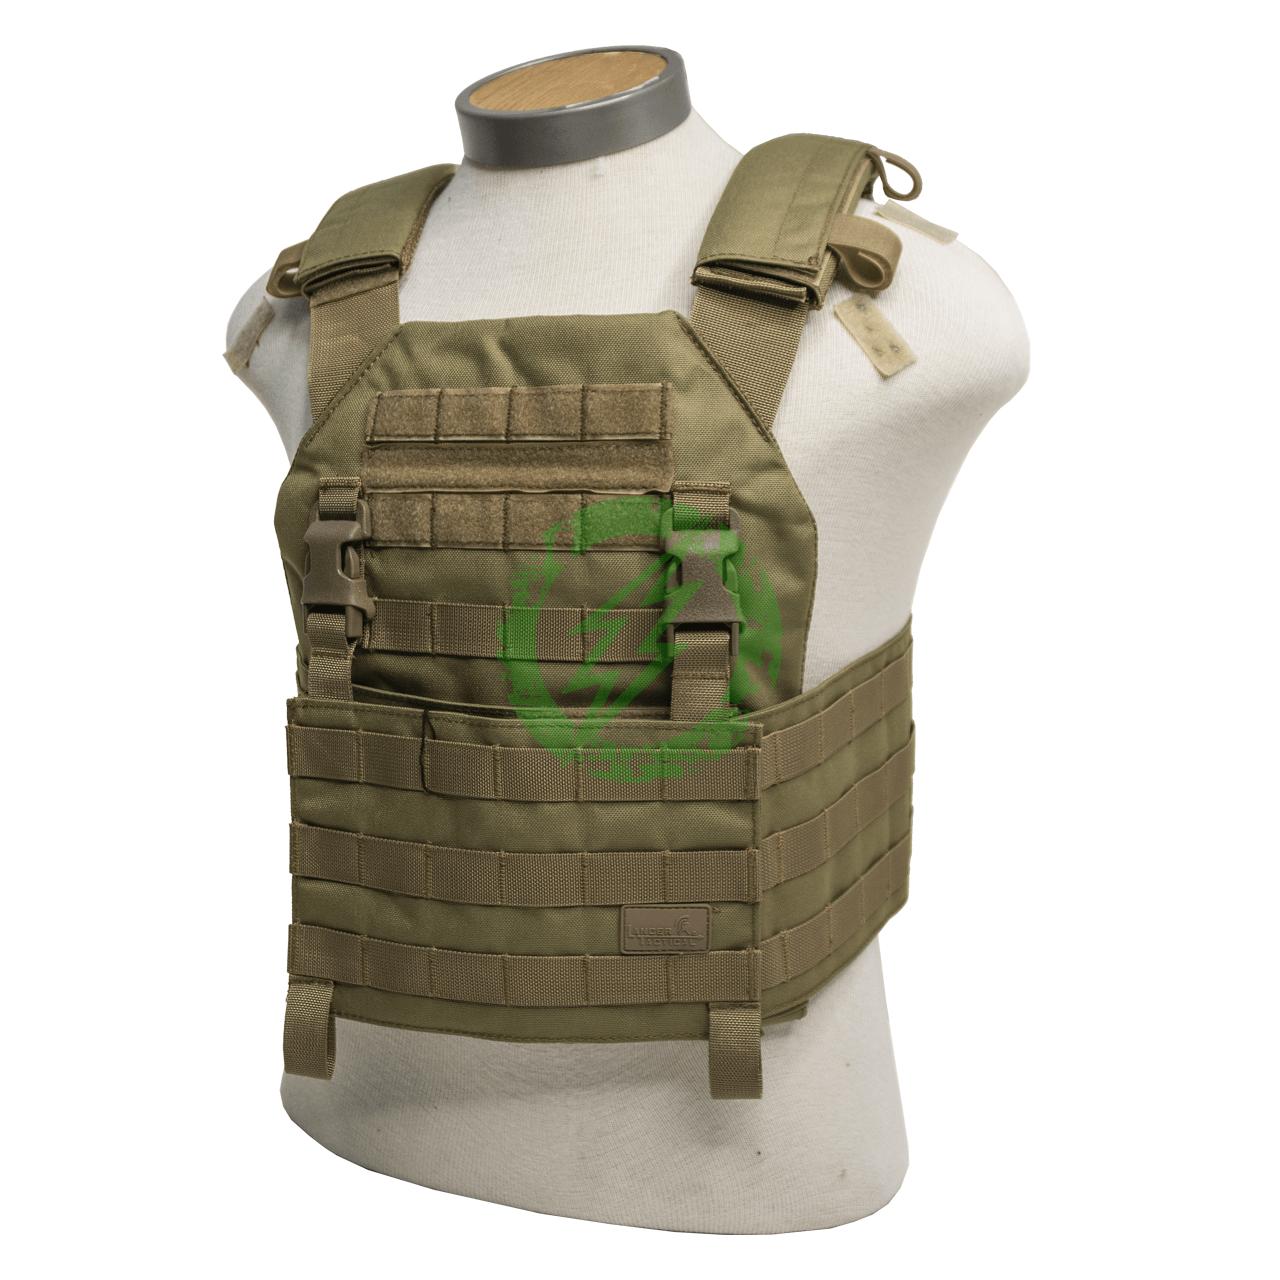 Lancer Tactical Nylon Buckle Up Assault Plate Carriers